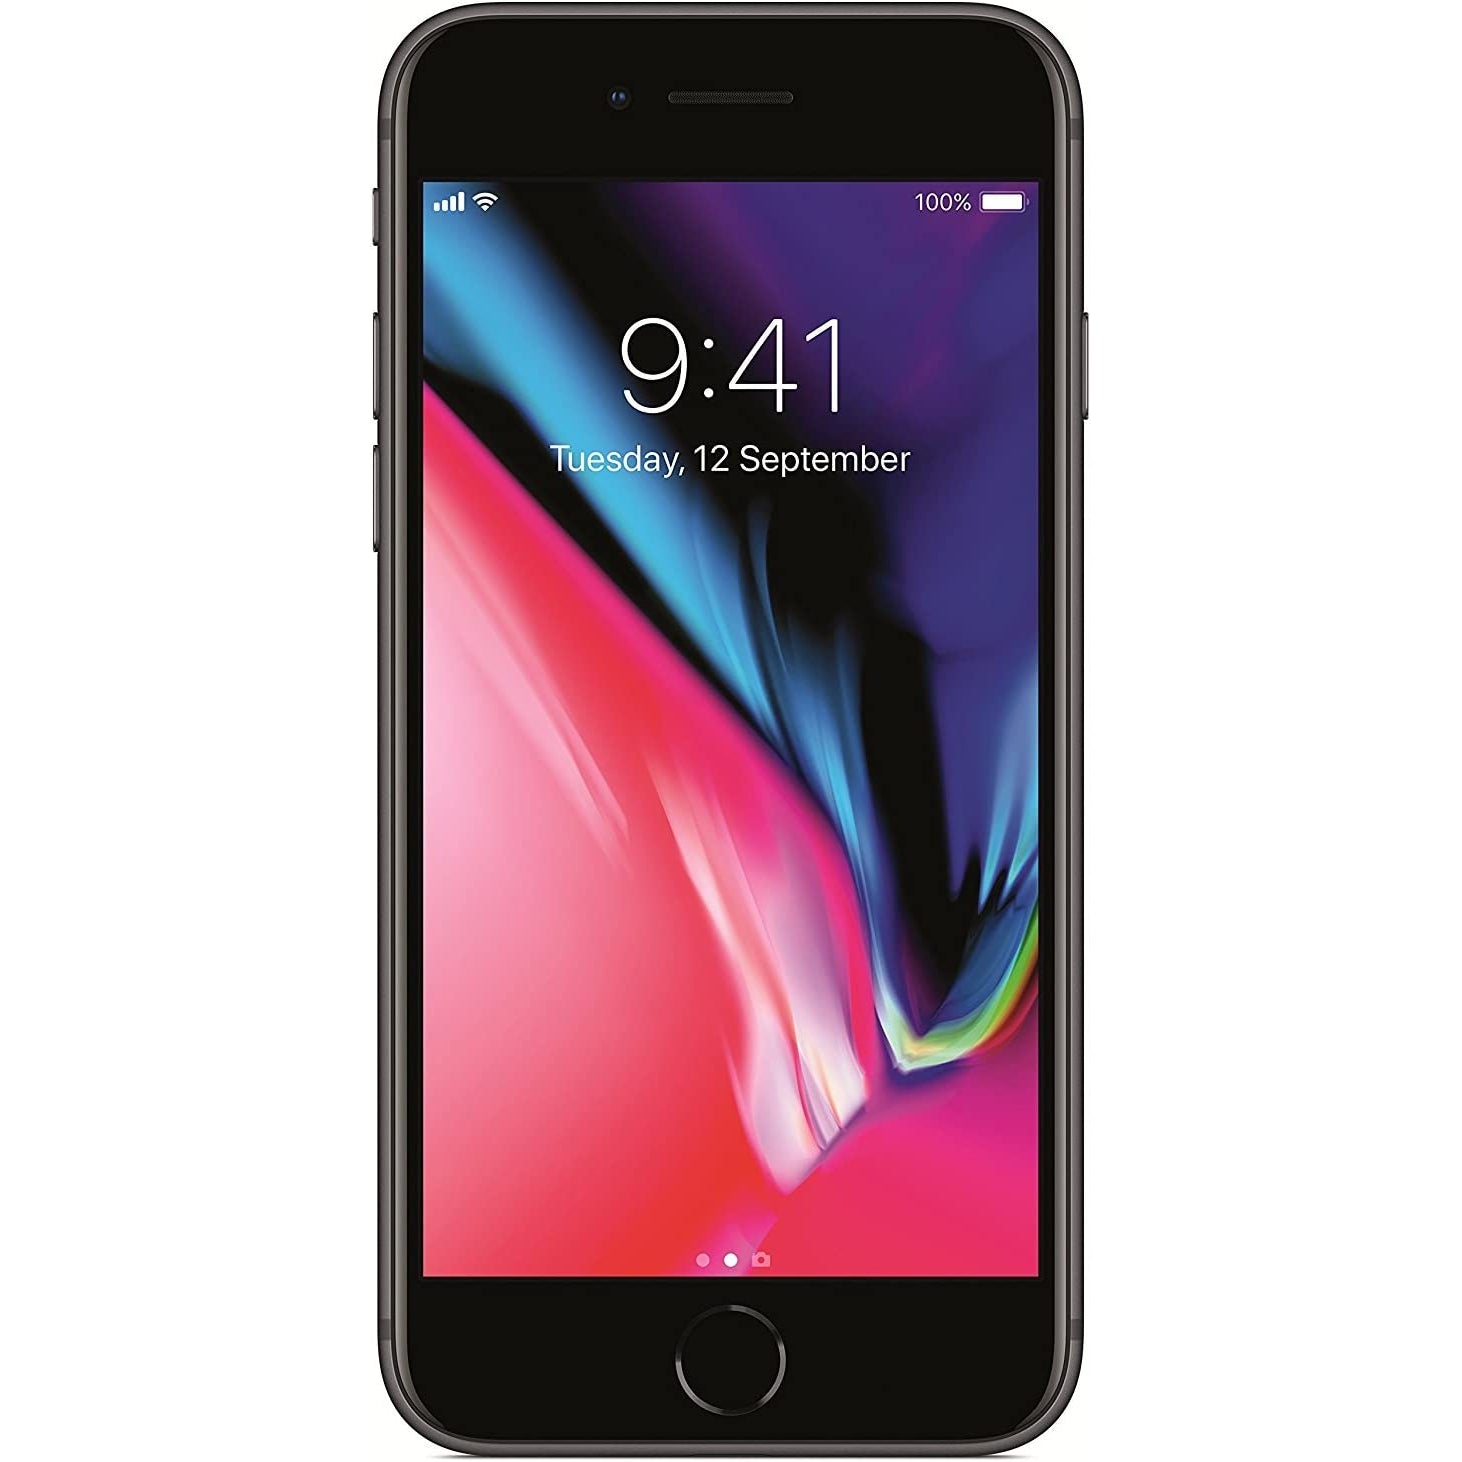 Apple iPhone 8 Plus 64GB Space Grey, Silver, Gold or Red Unlocked - Good Condition